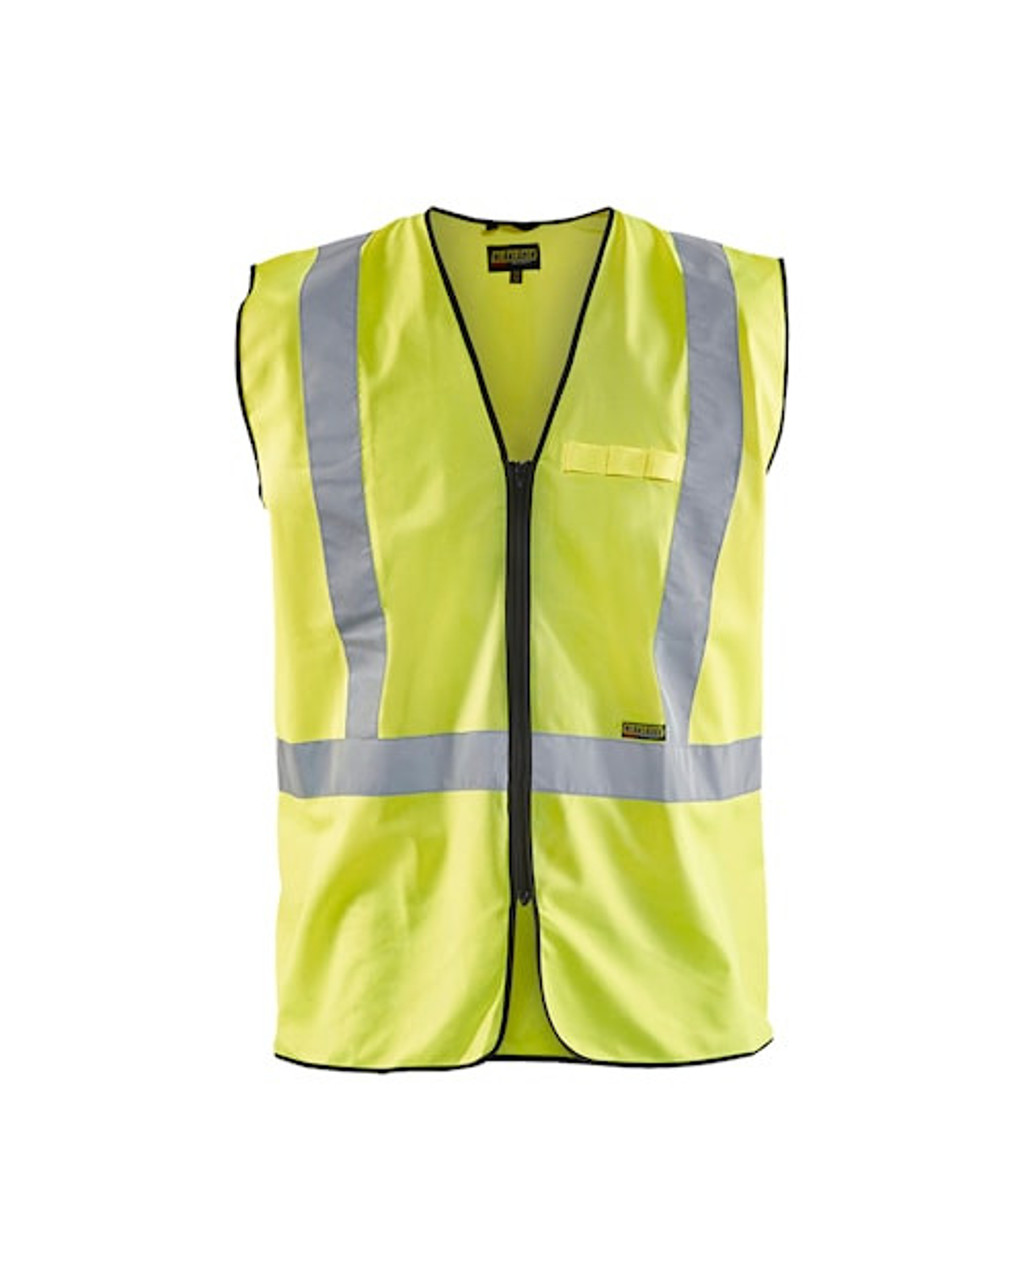 BLAKLADER Vest | 3029 Neutral Vest with Reflective Tape + VISITOR Print for Plumbers, Carpenters, Electricians in the Construction Industry